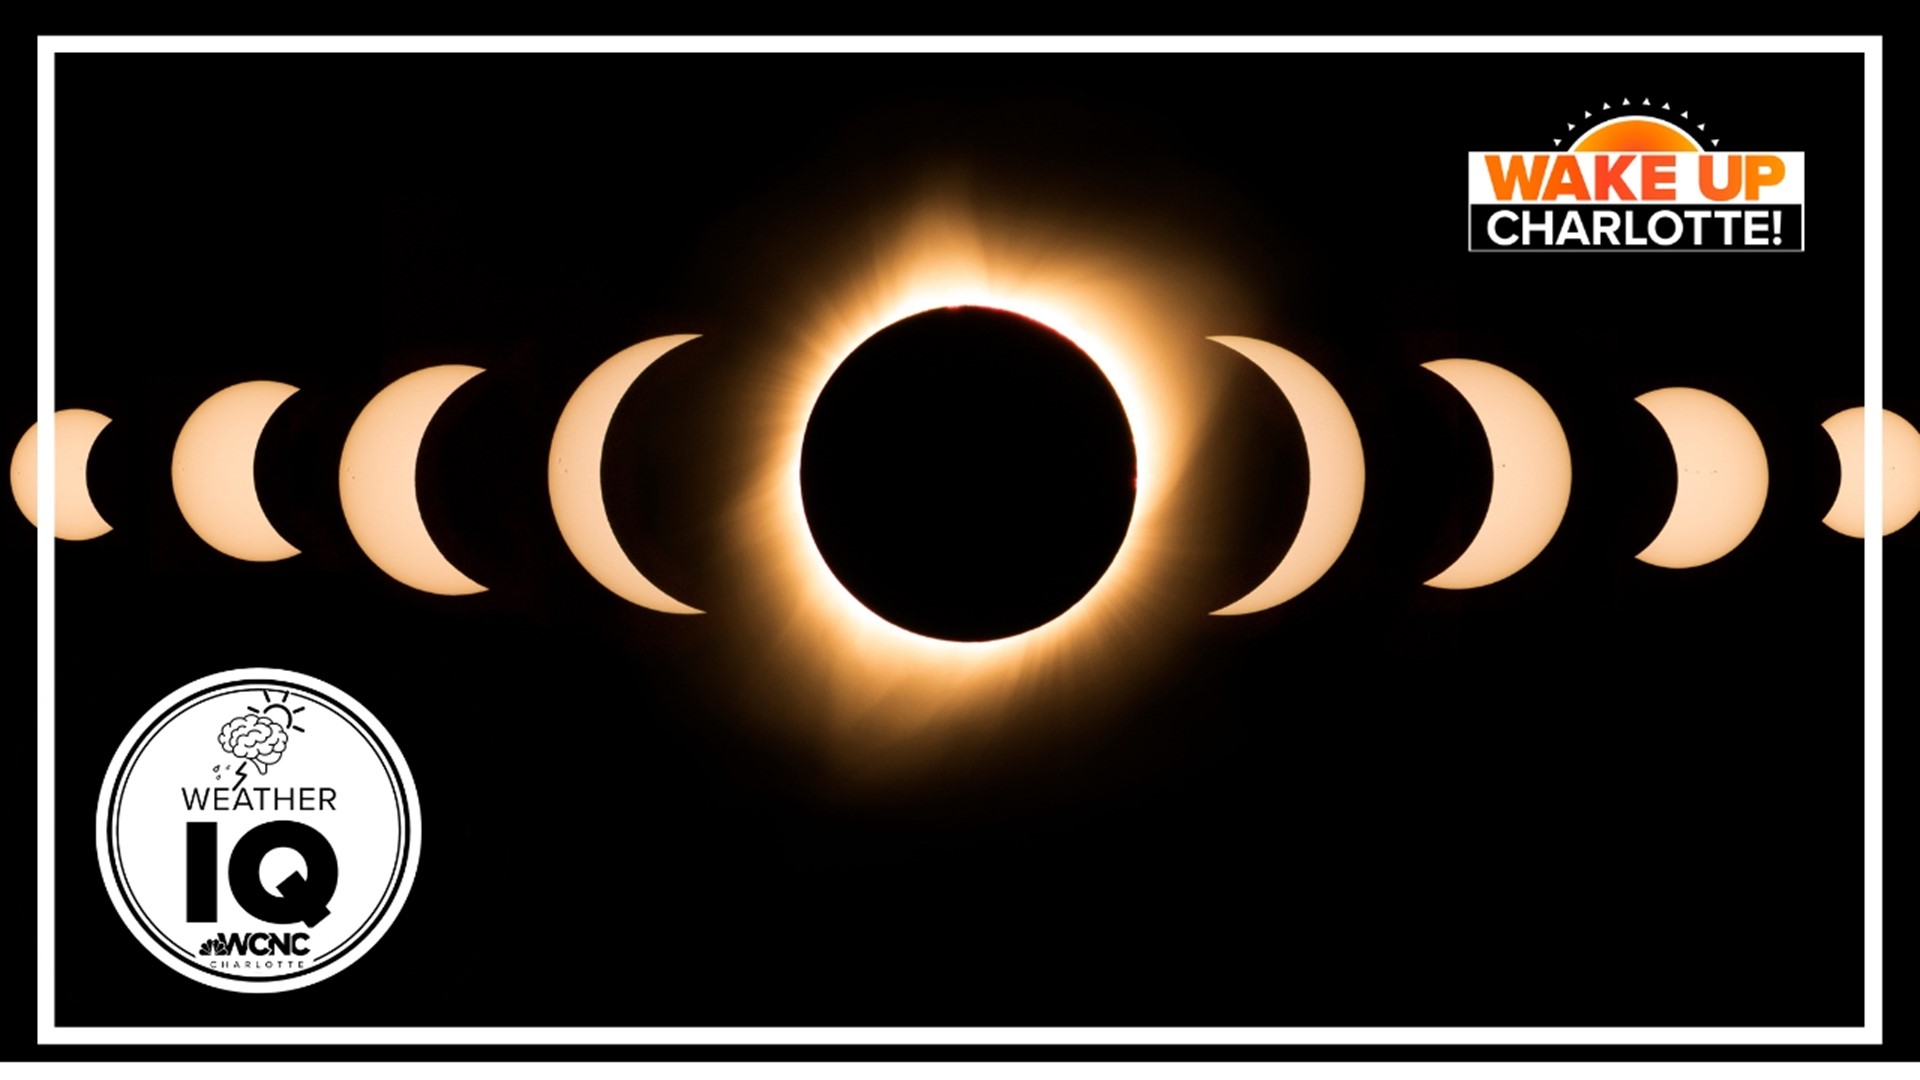 The Rare 'Ring of Fire Eclipse' Who sees it and the next eclipse to